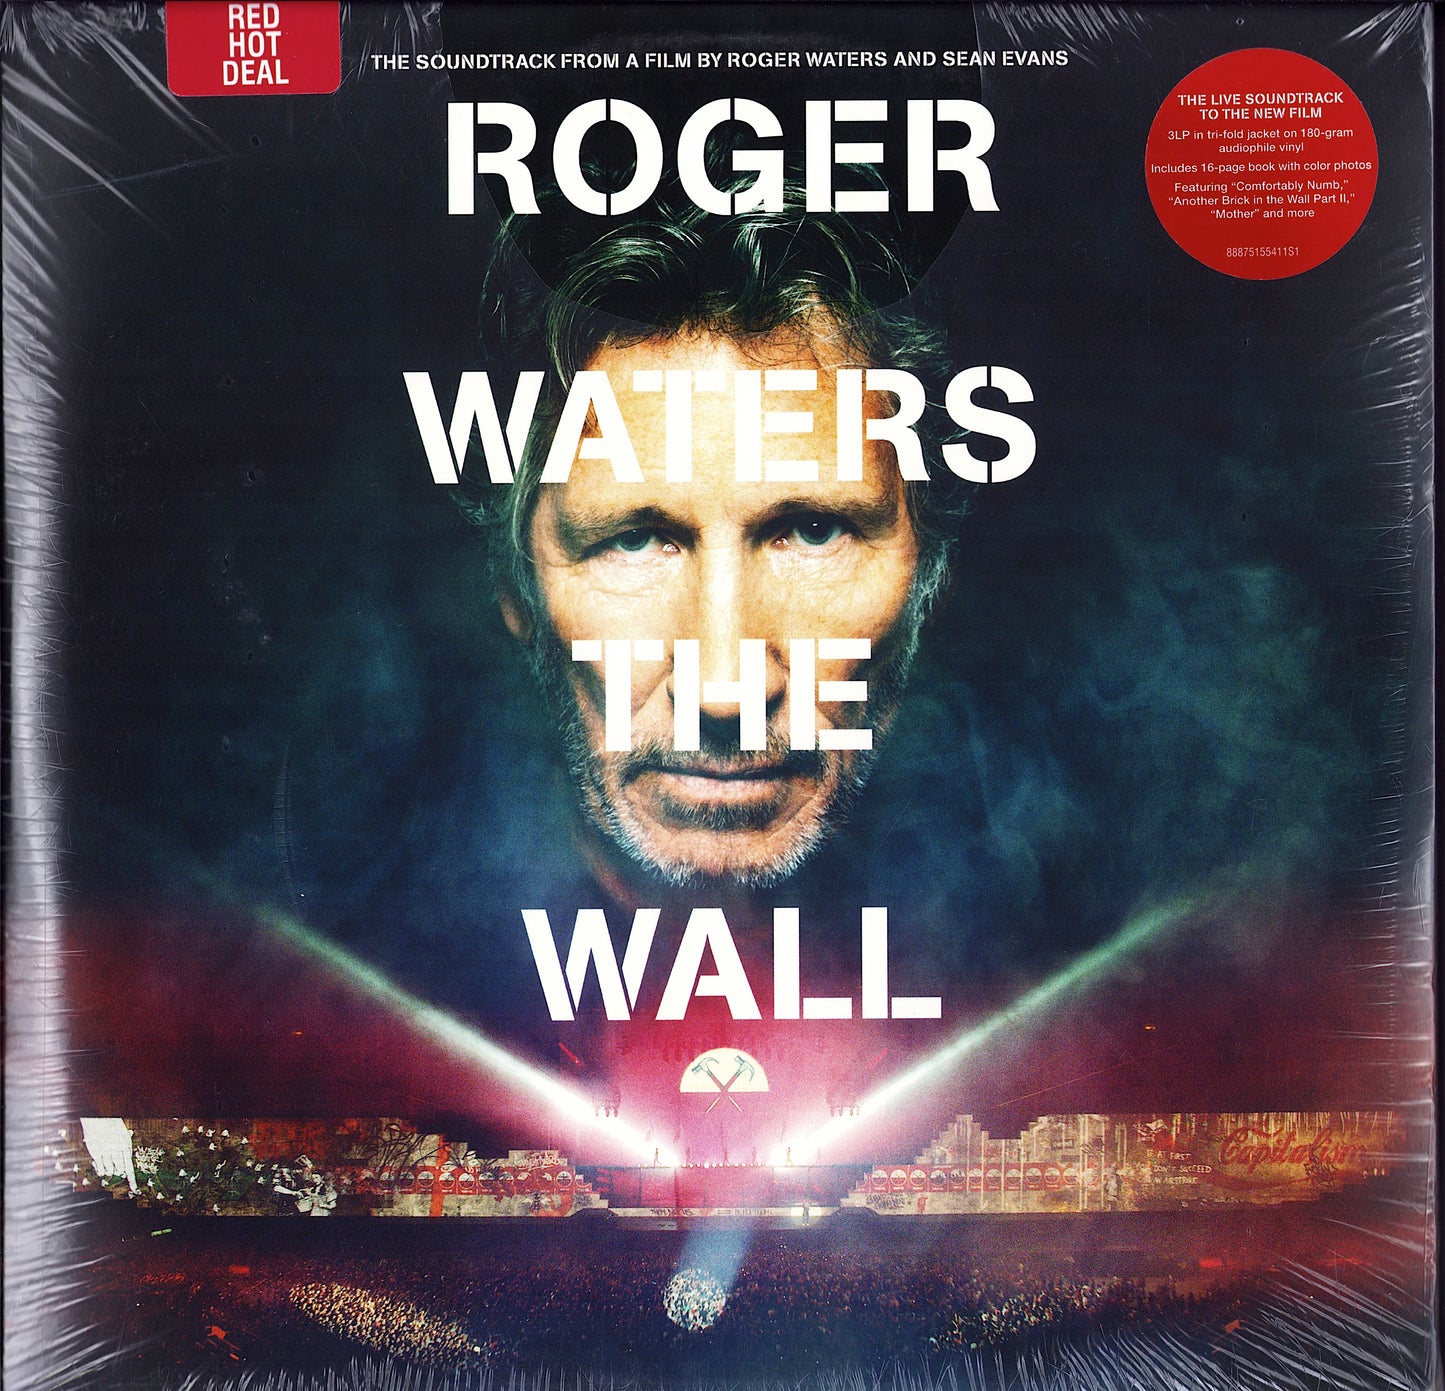 Roger Waters - The Wall (Vinyl 3LP)